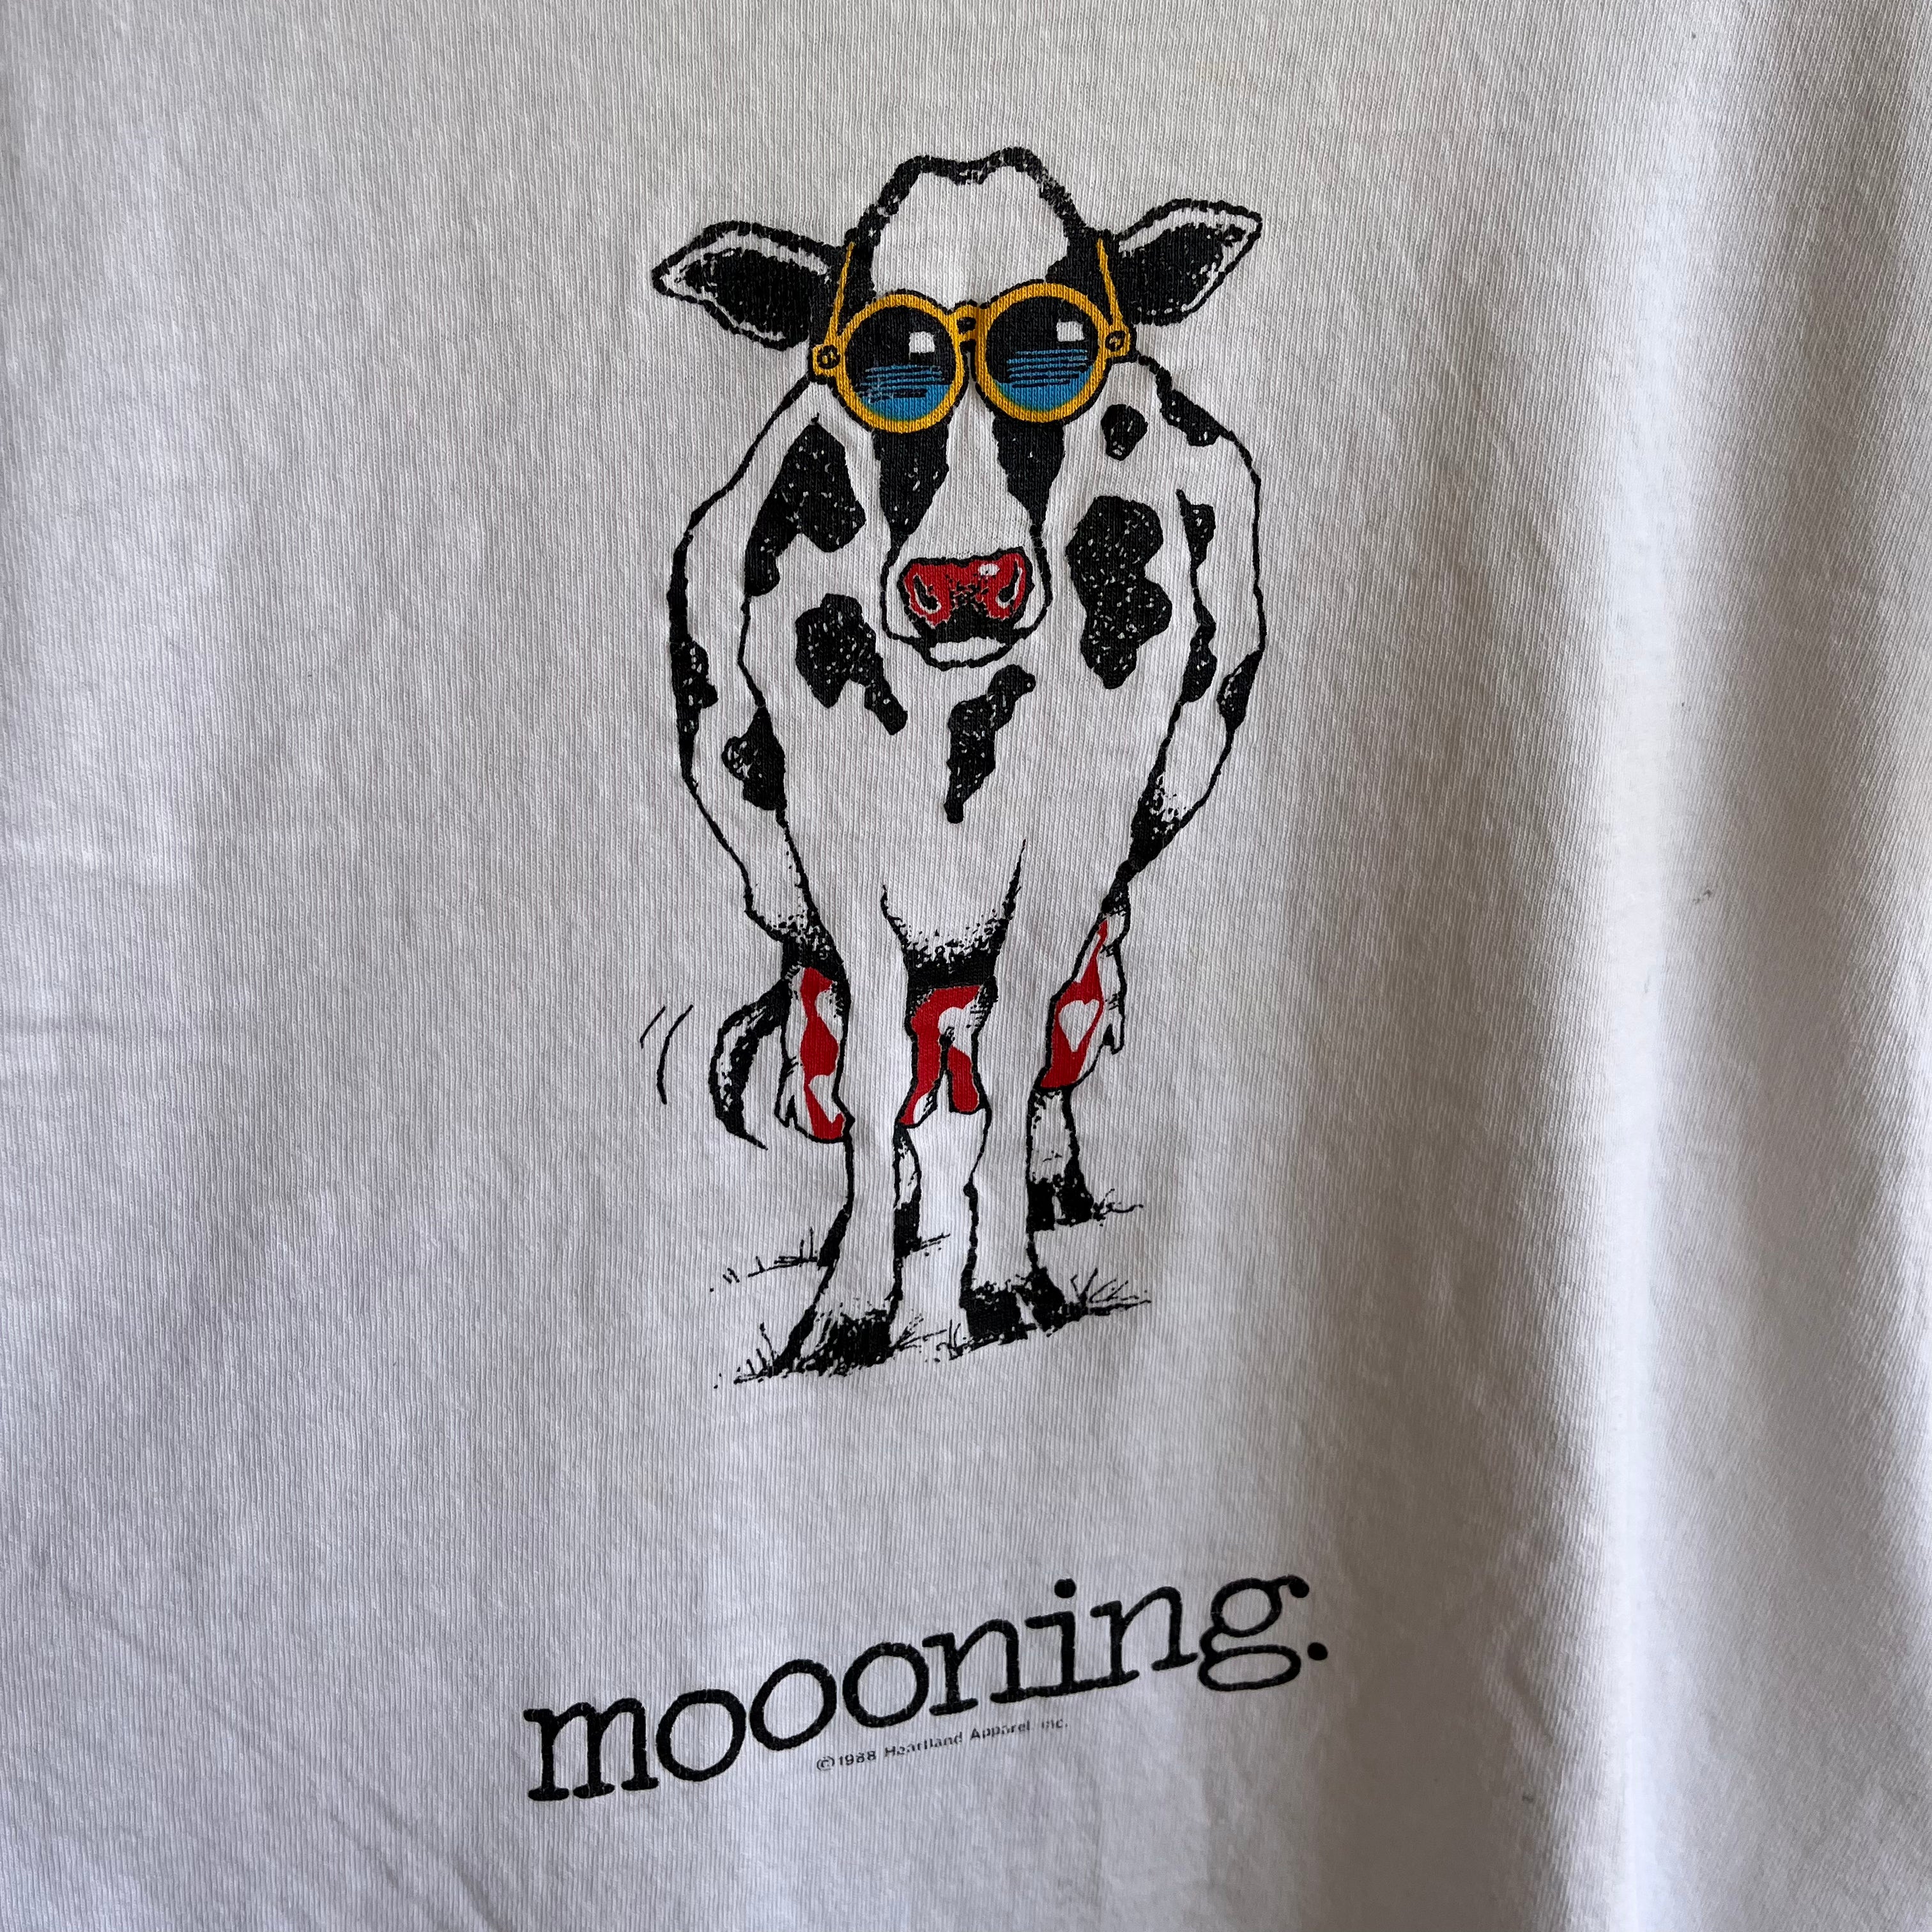 1988 Mooning Cow T-Shirt (the backside)